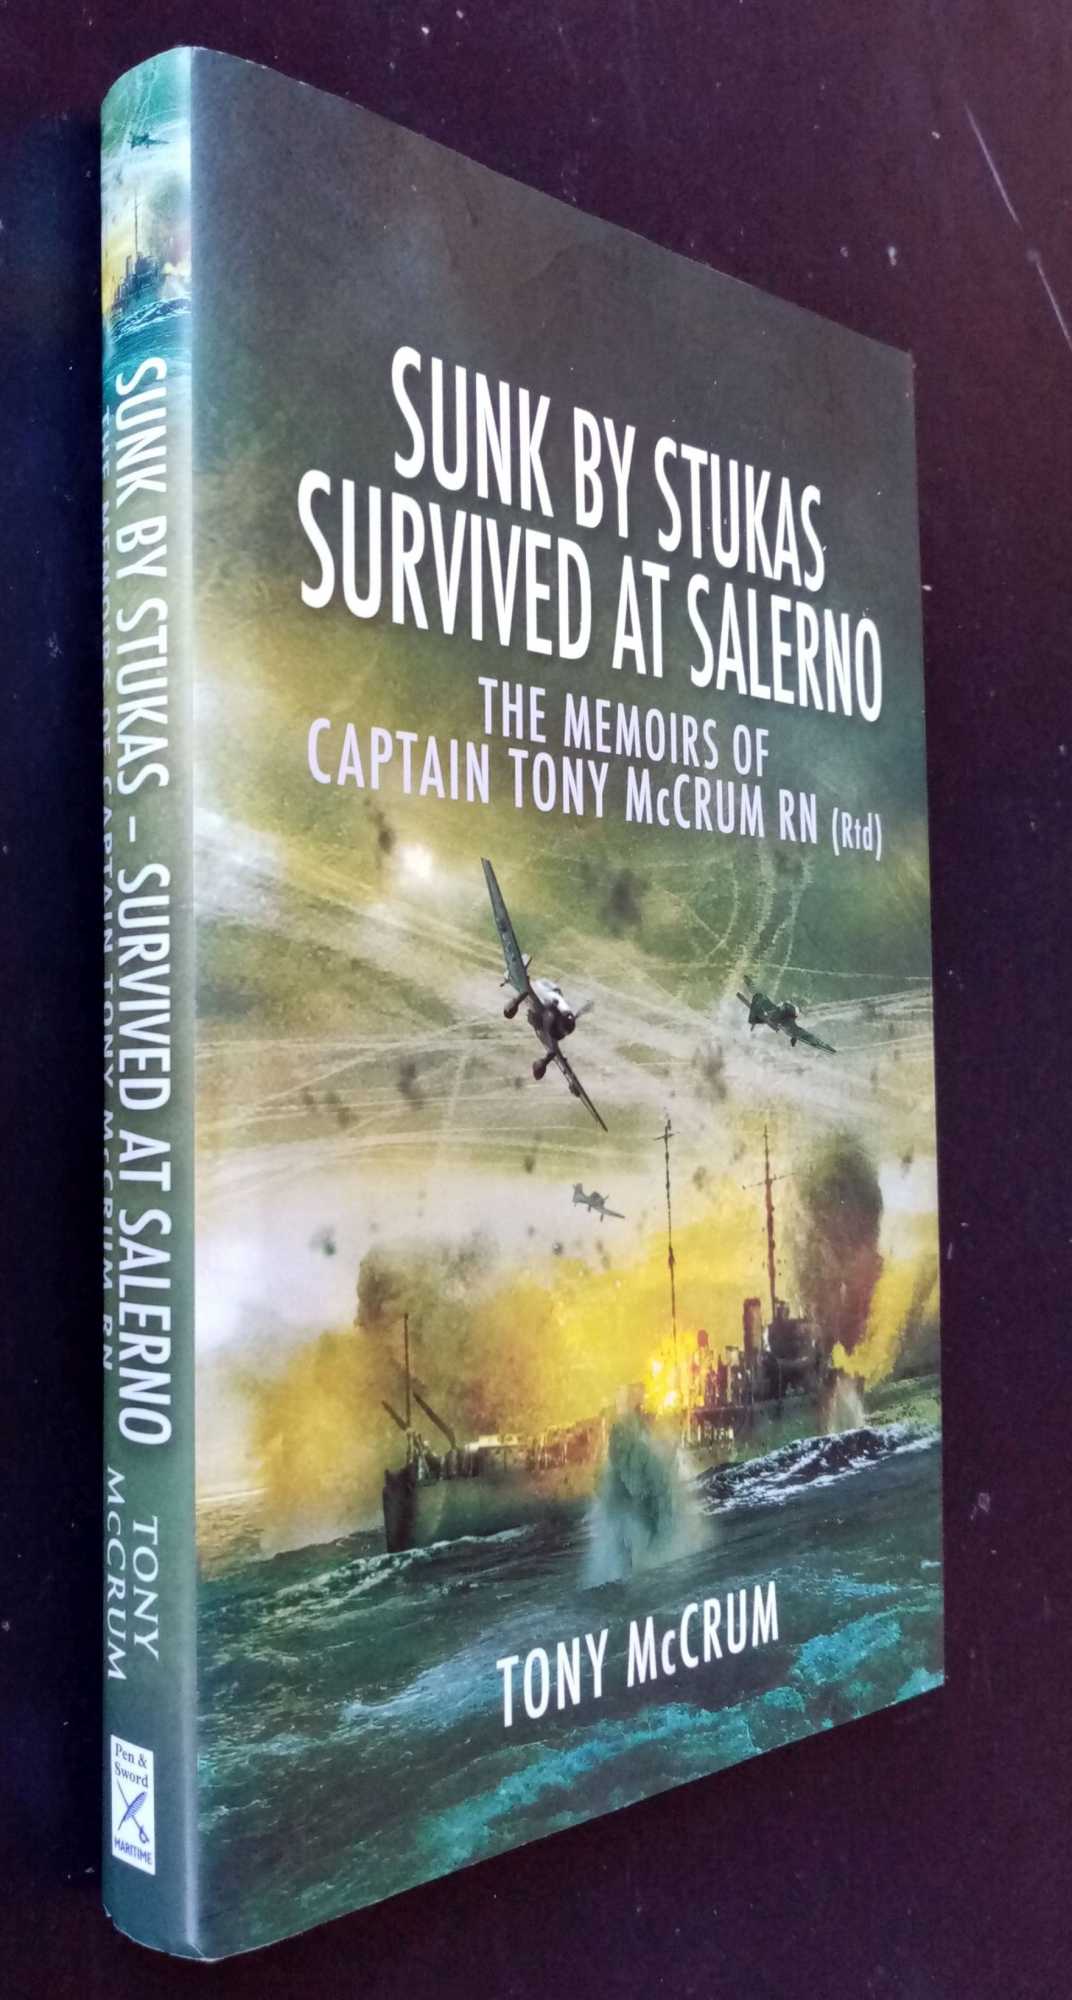 Tony McCrum - Sunk by Stukas, Survived at Salerno: The Memoirs of Captain Tony McCrum RN